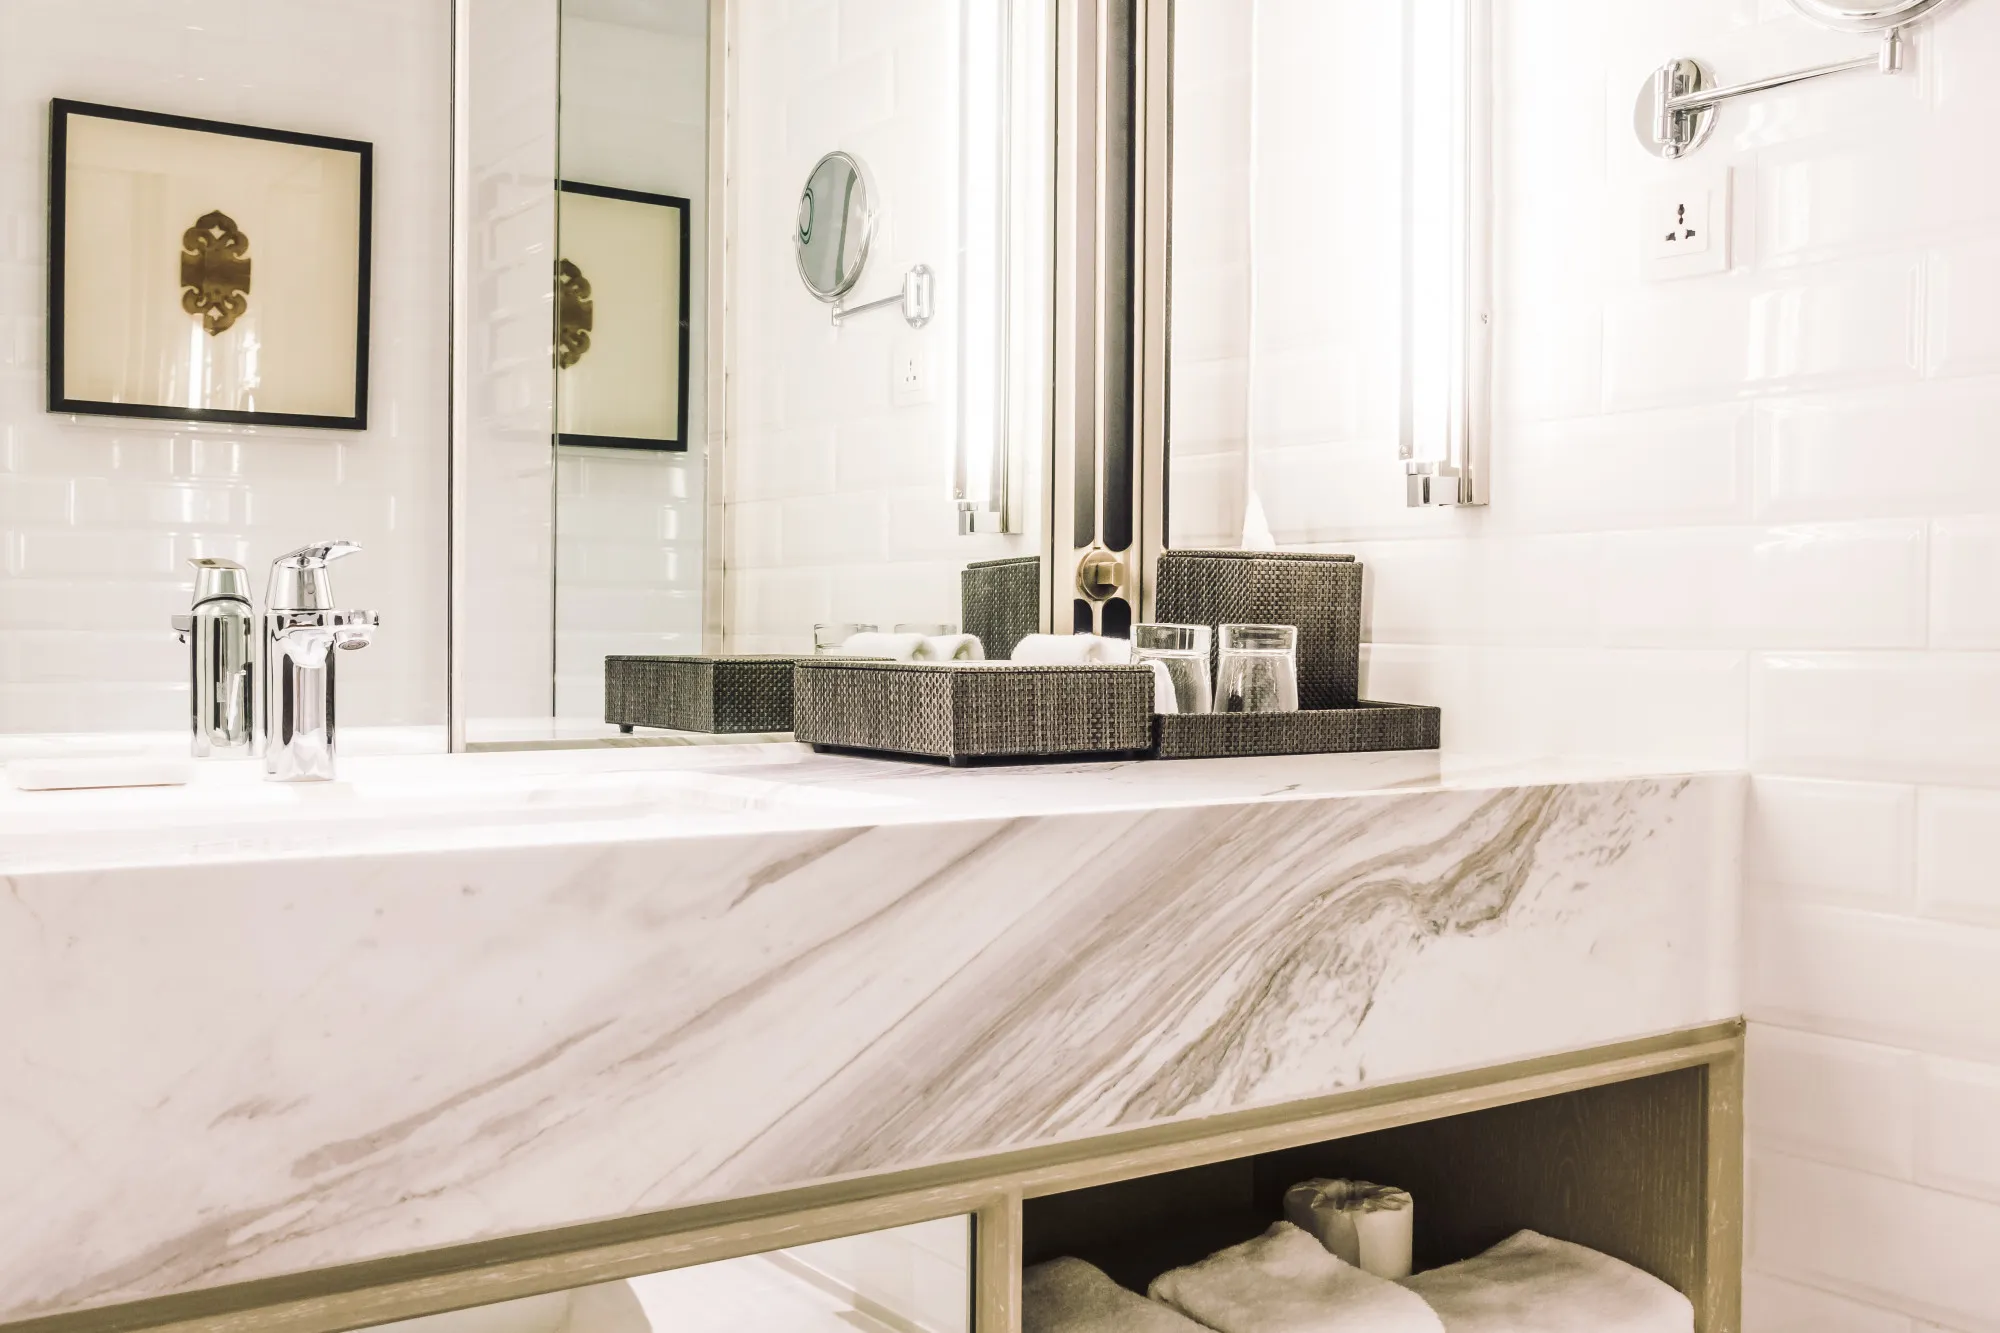 An ample supply of hand soap, shower soap, body wash, shampoo & conditioner, is a must for your guest bathroom.